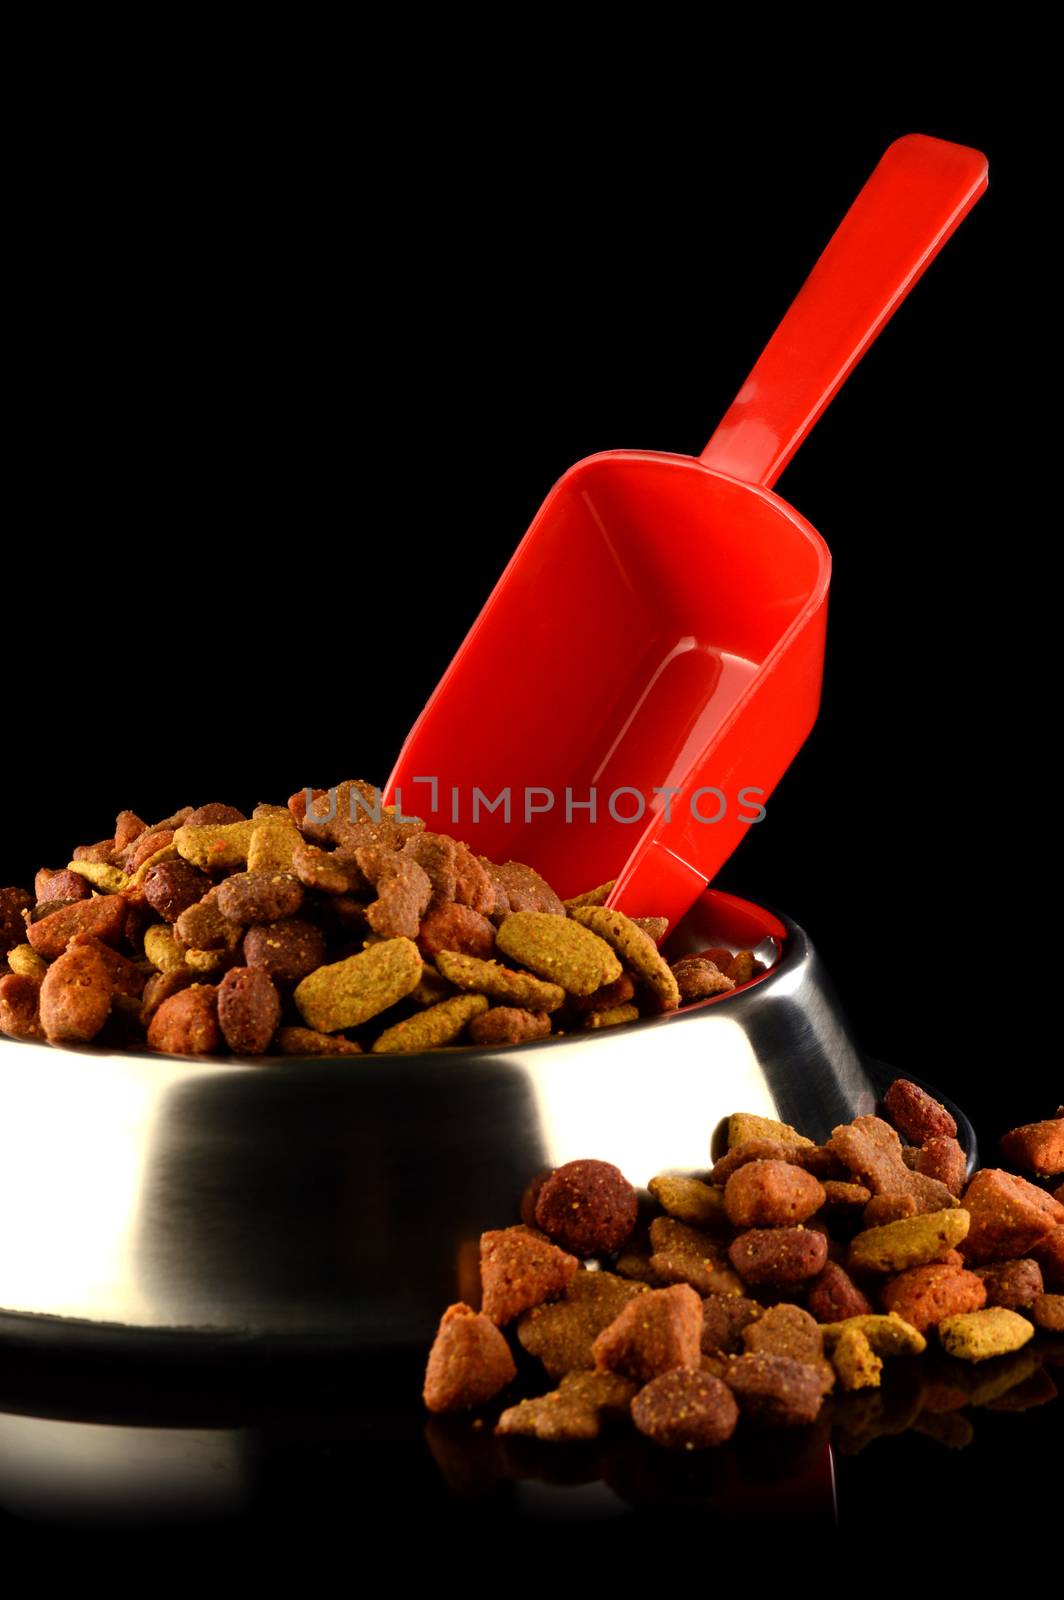 A vertical composition of a red scoop filling a chrome dog dish full of food for the beloved pet.